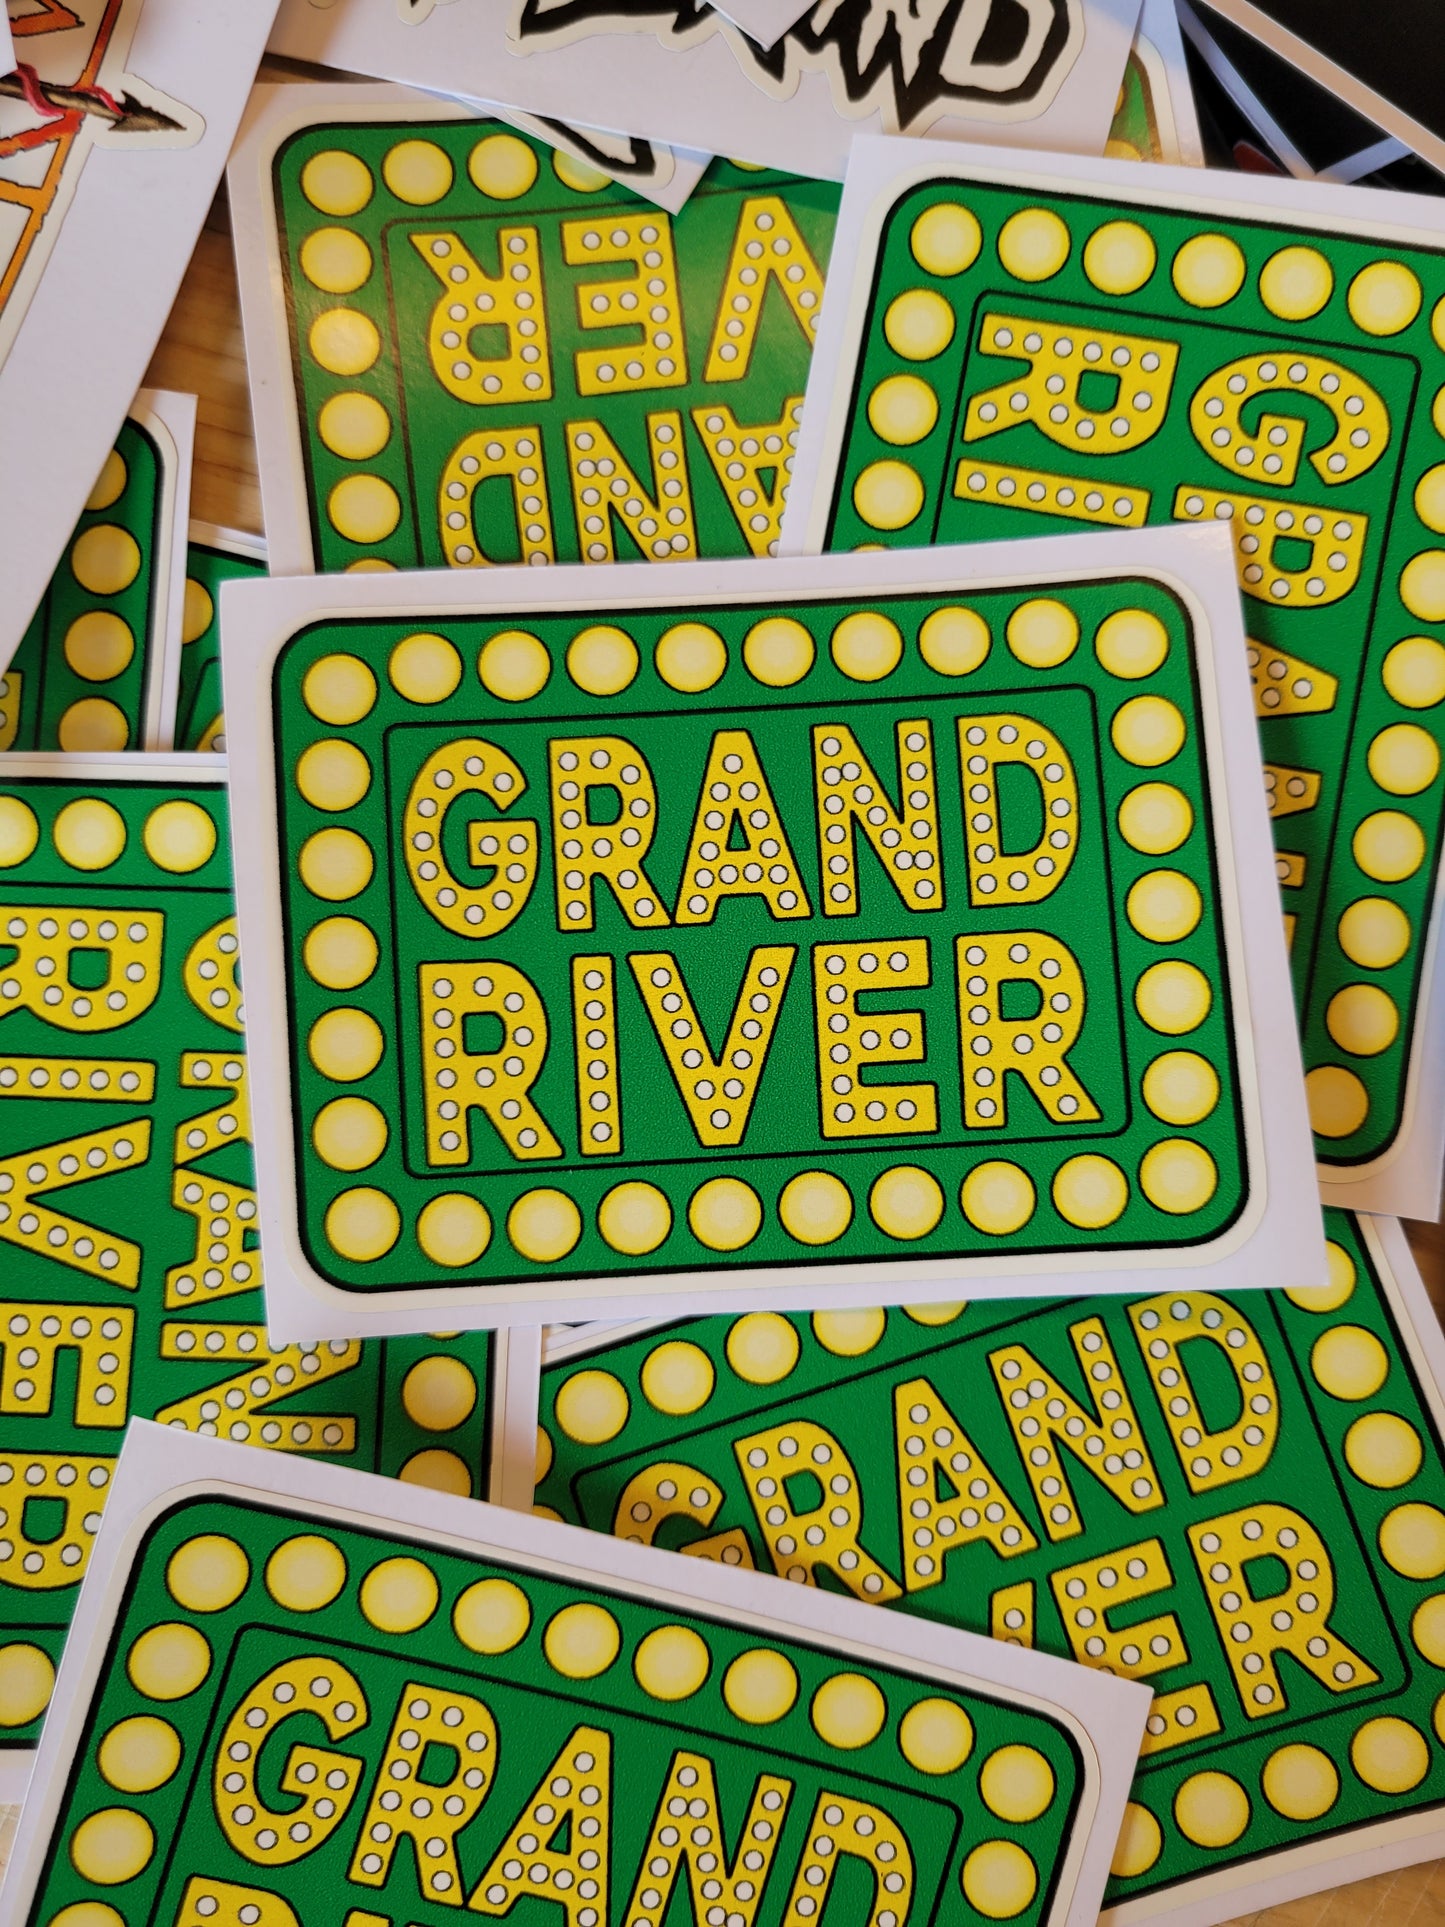 Grand River Stickers - For The Homies